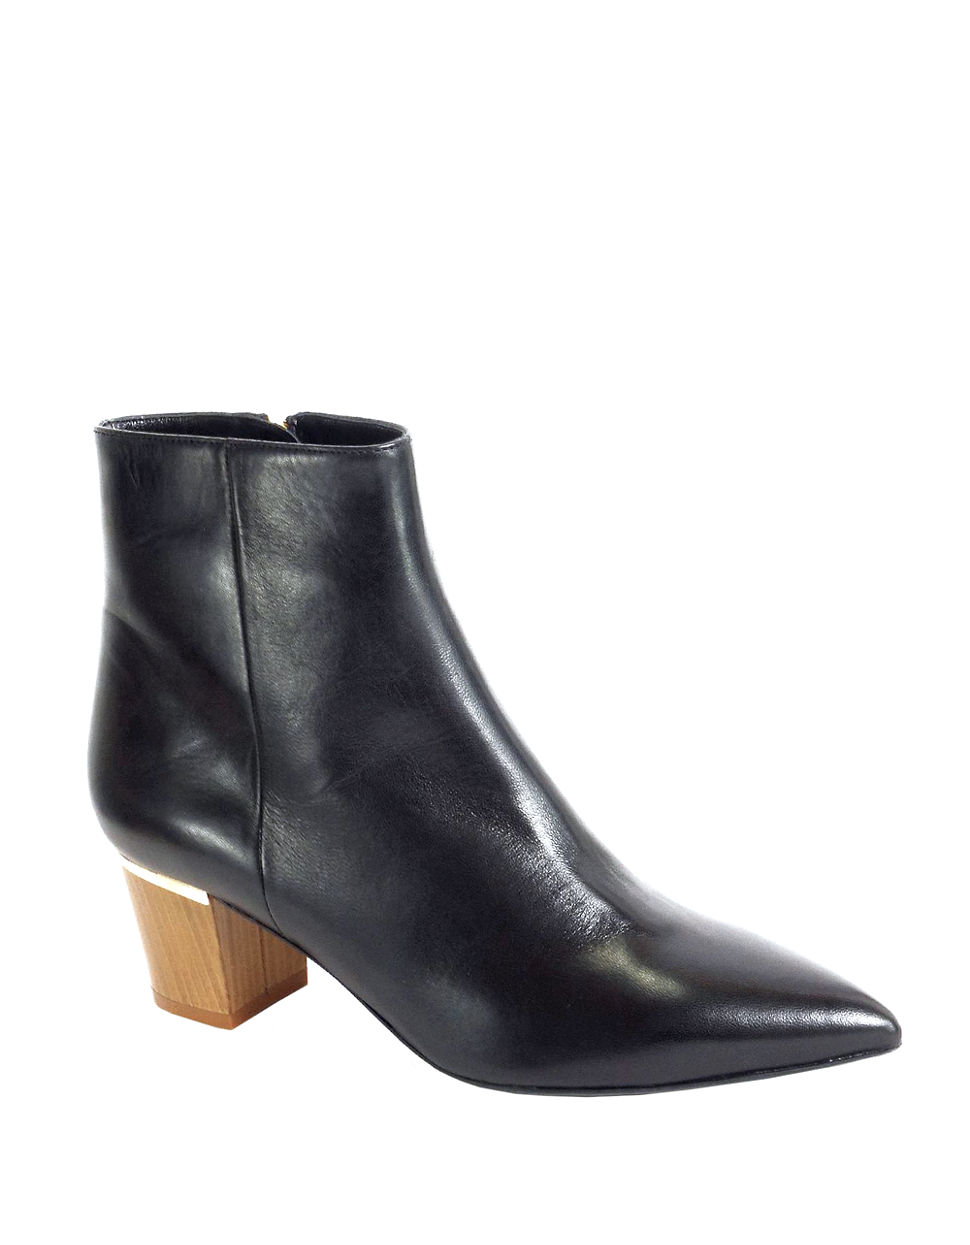 Kate spade Christina Leather Booties in Black | Lyst